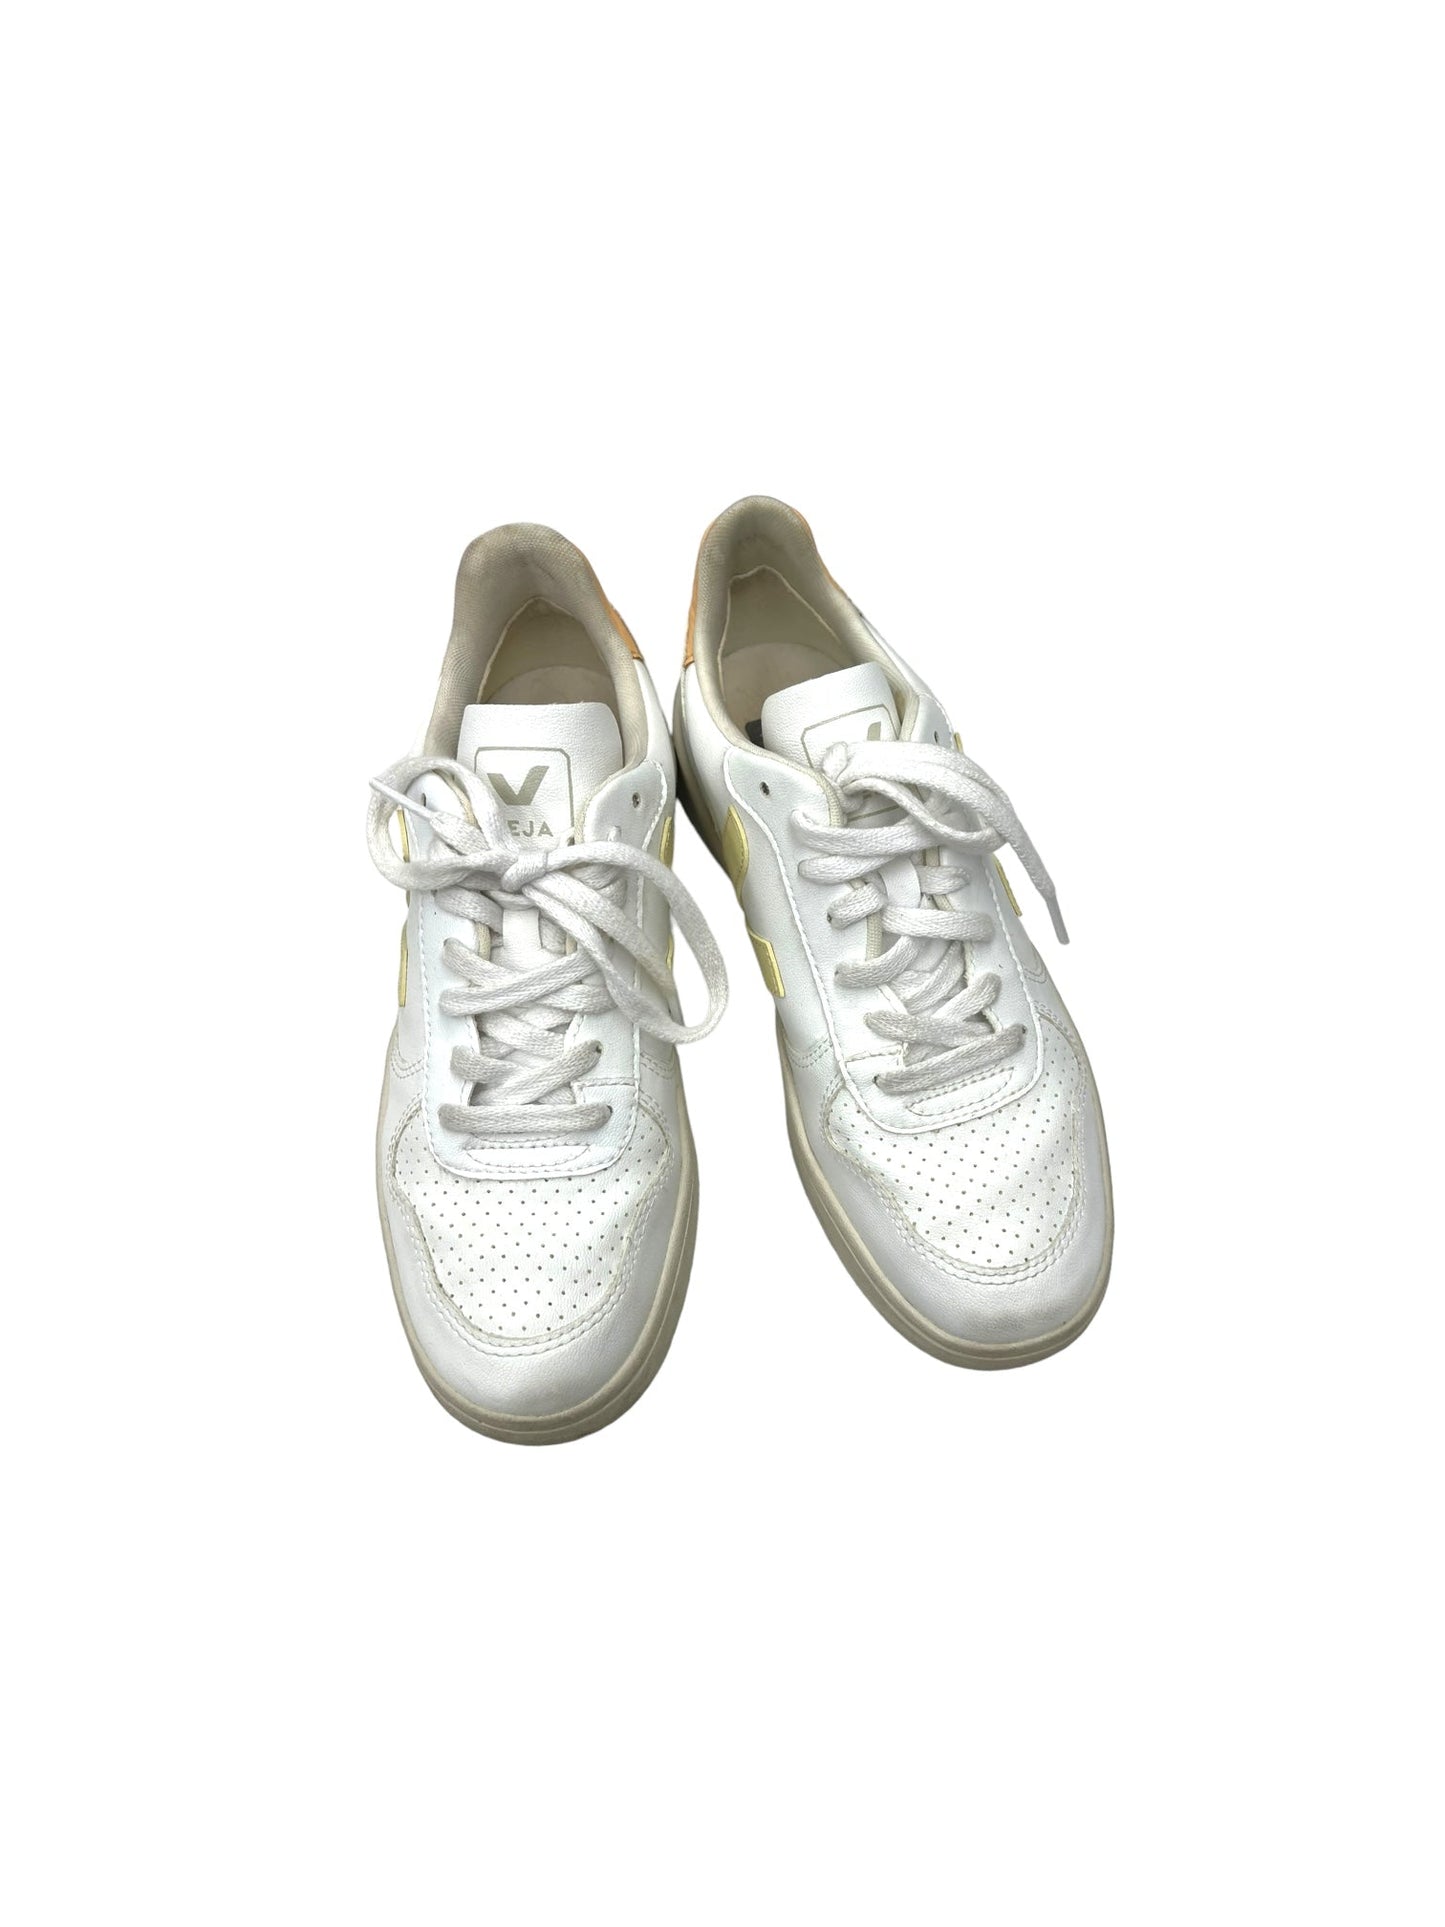 White & Yellow Shoes Sneakers VEJA, Size 8